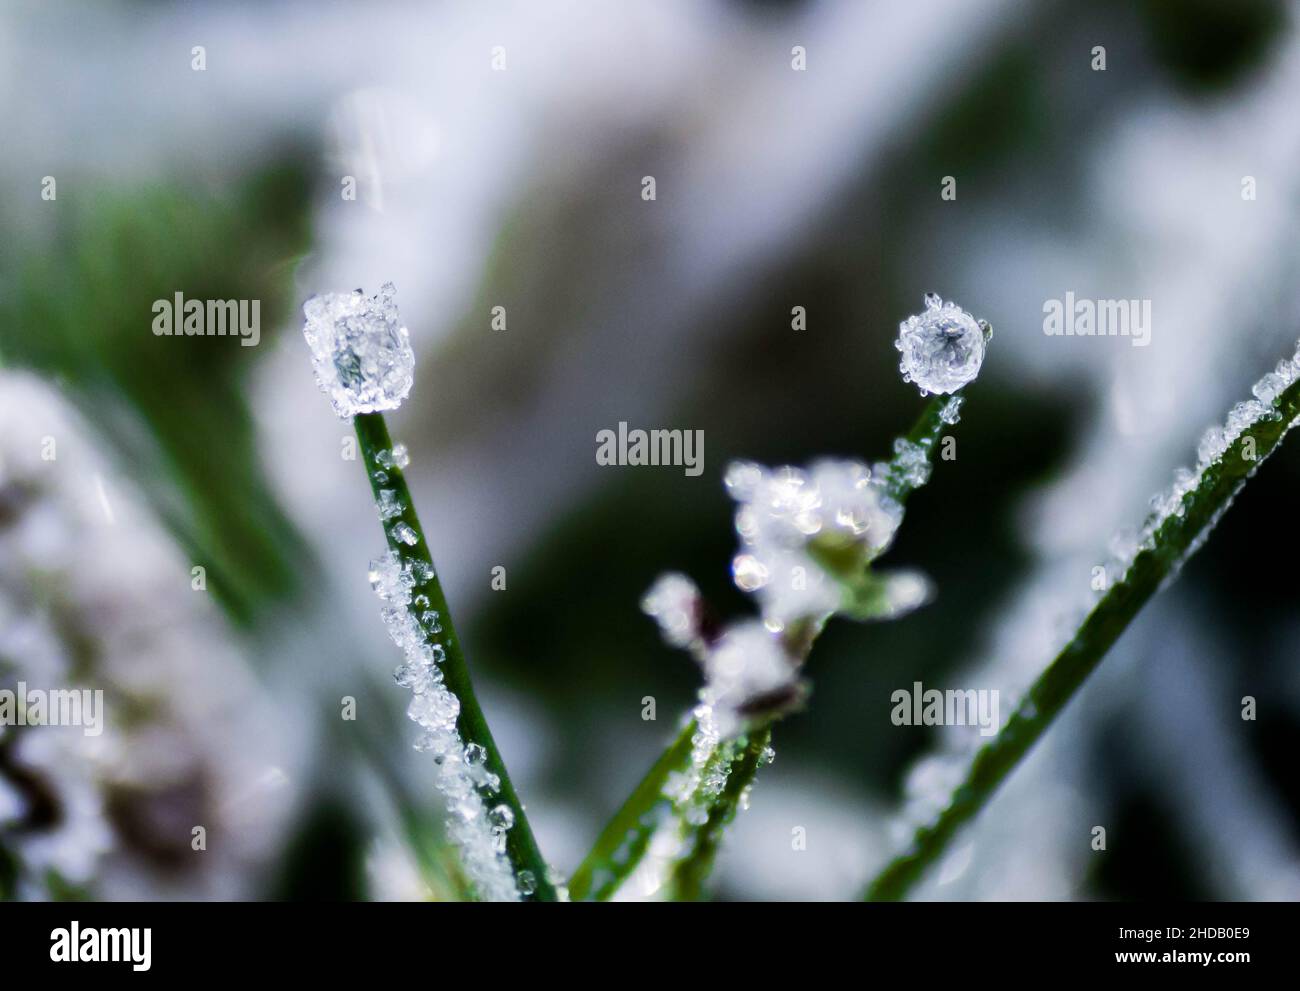 Shallow focus of Eriocaulon plants with icy snow on it with a blurred background Stock Photo